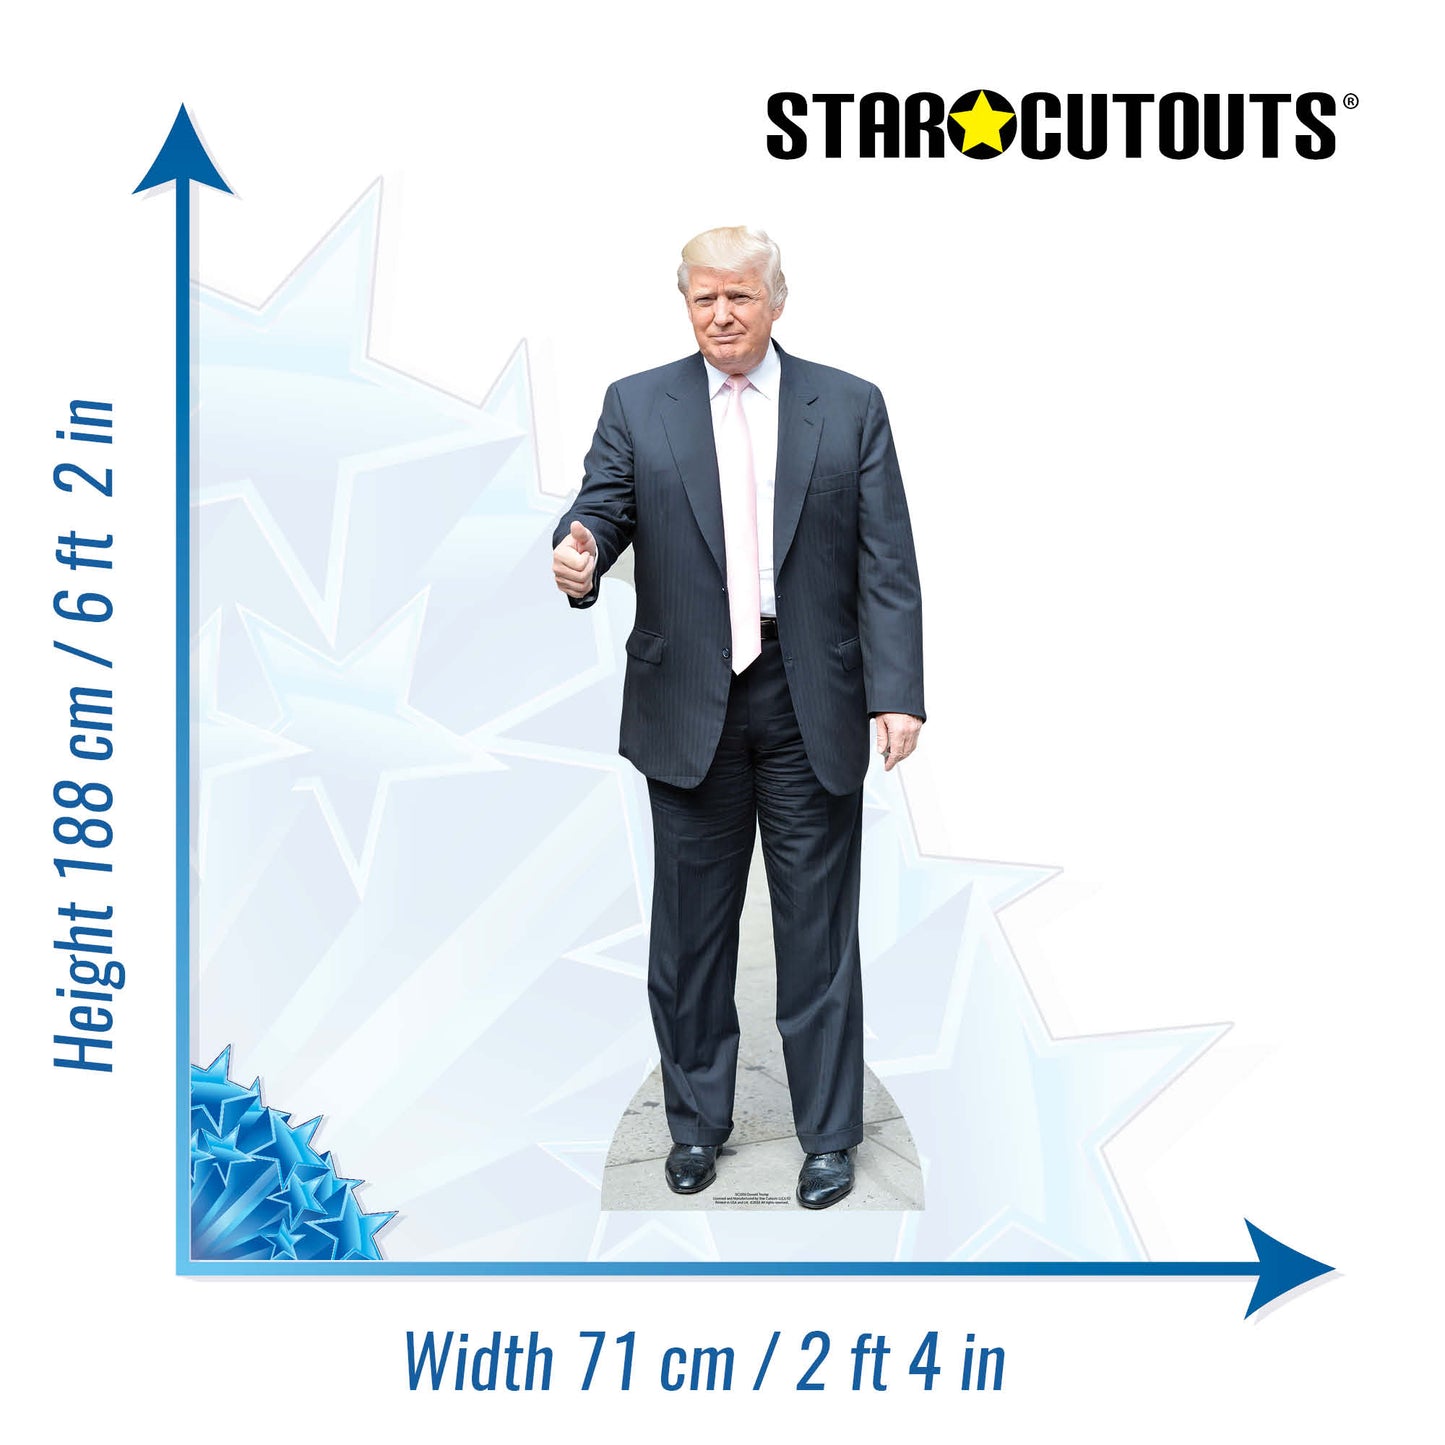 SC1950  Donald Trump (Pink Tie) Cardboard Cut Out Height 188cm